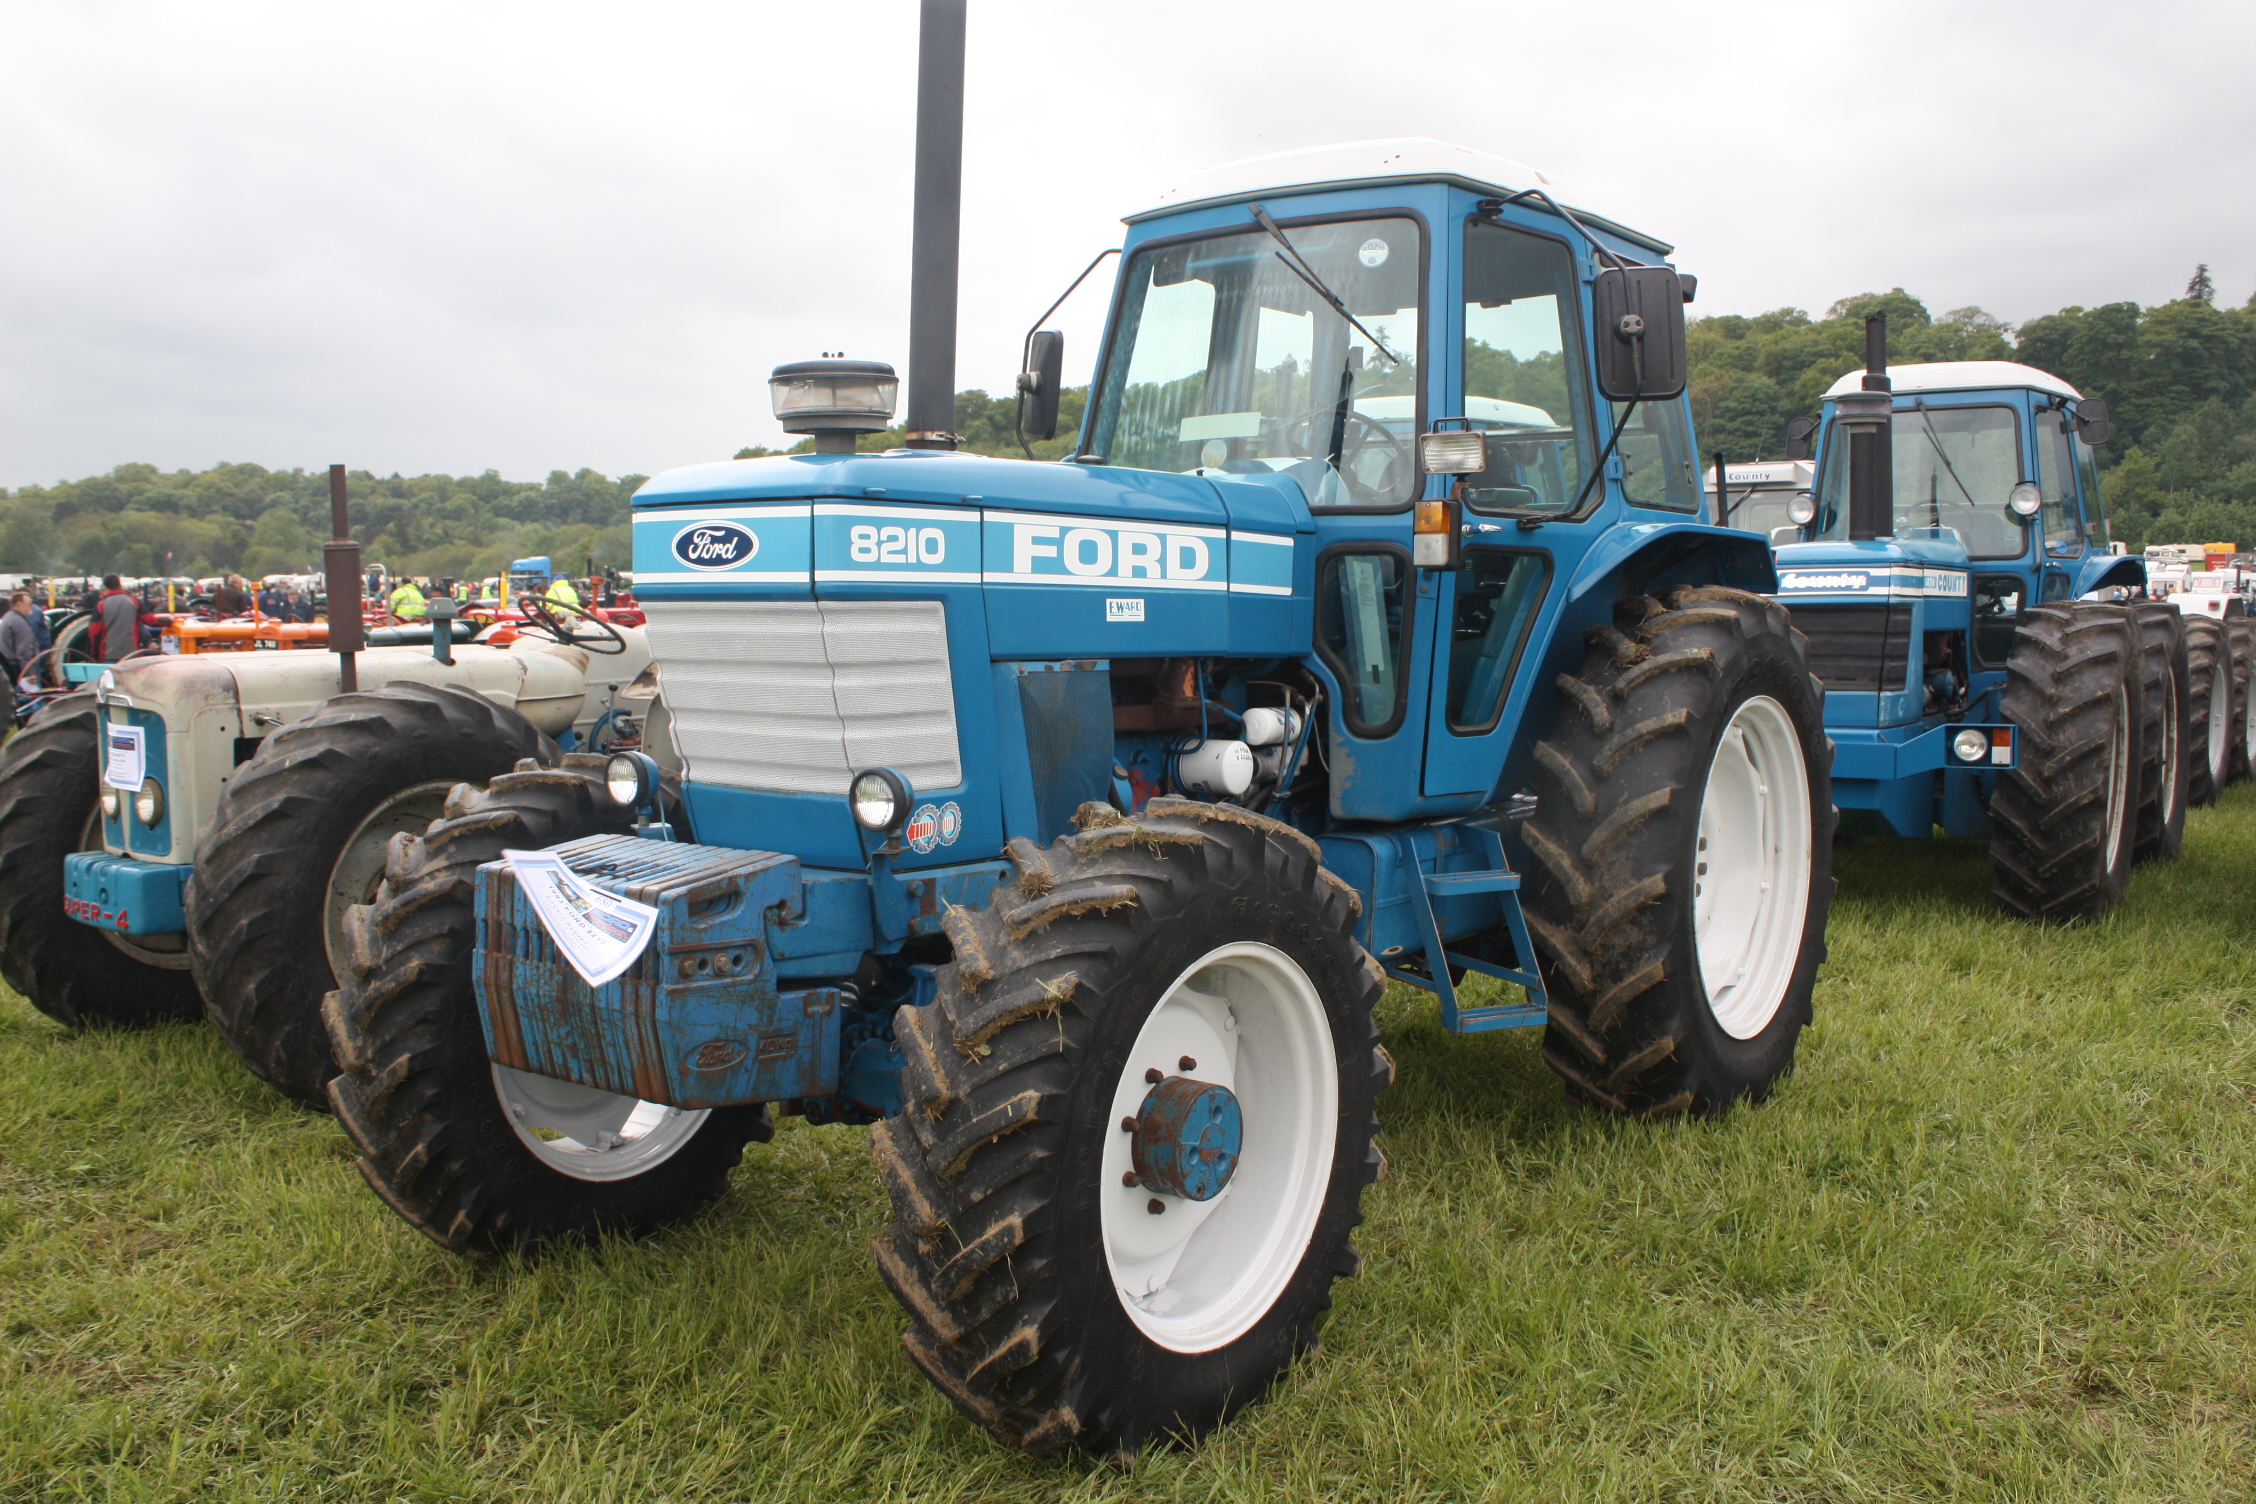 Ford 8210 tractor engine